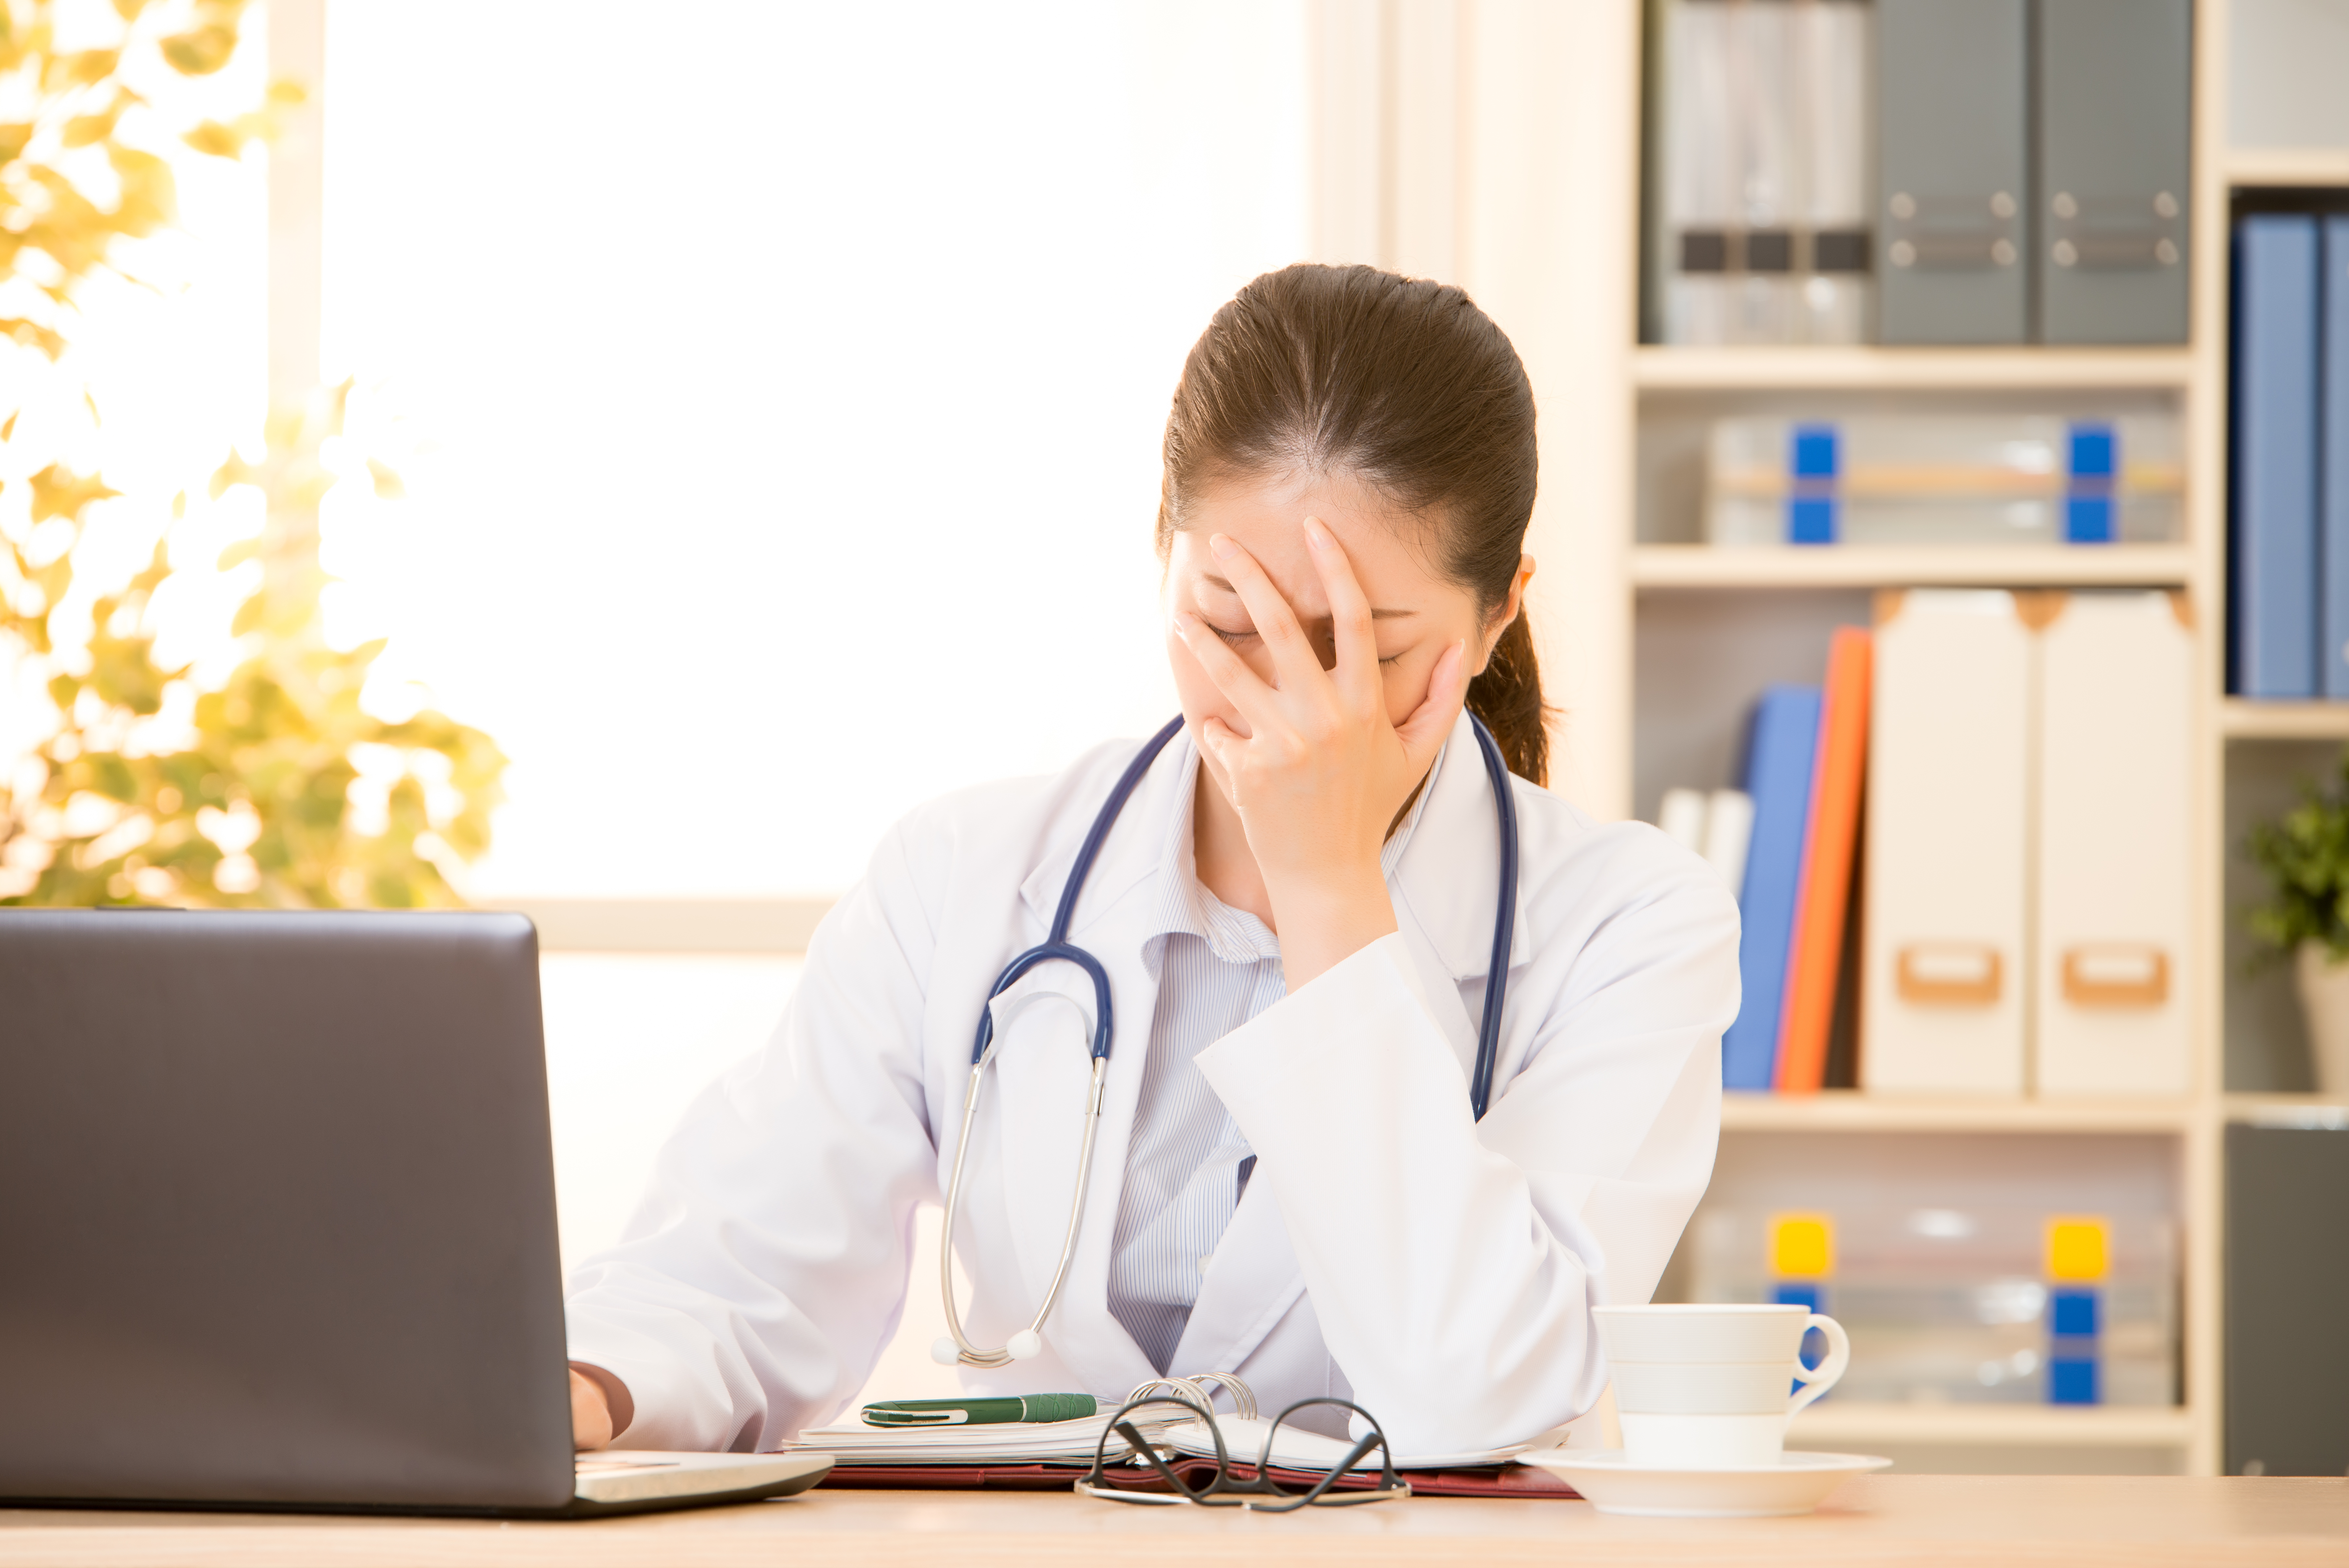 Young female doctor sitting at desk in front of computer covering face with hand in frustration